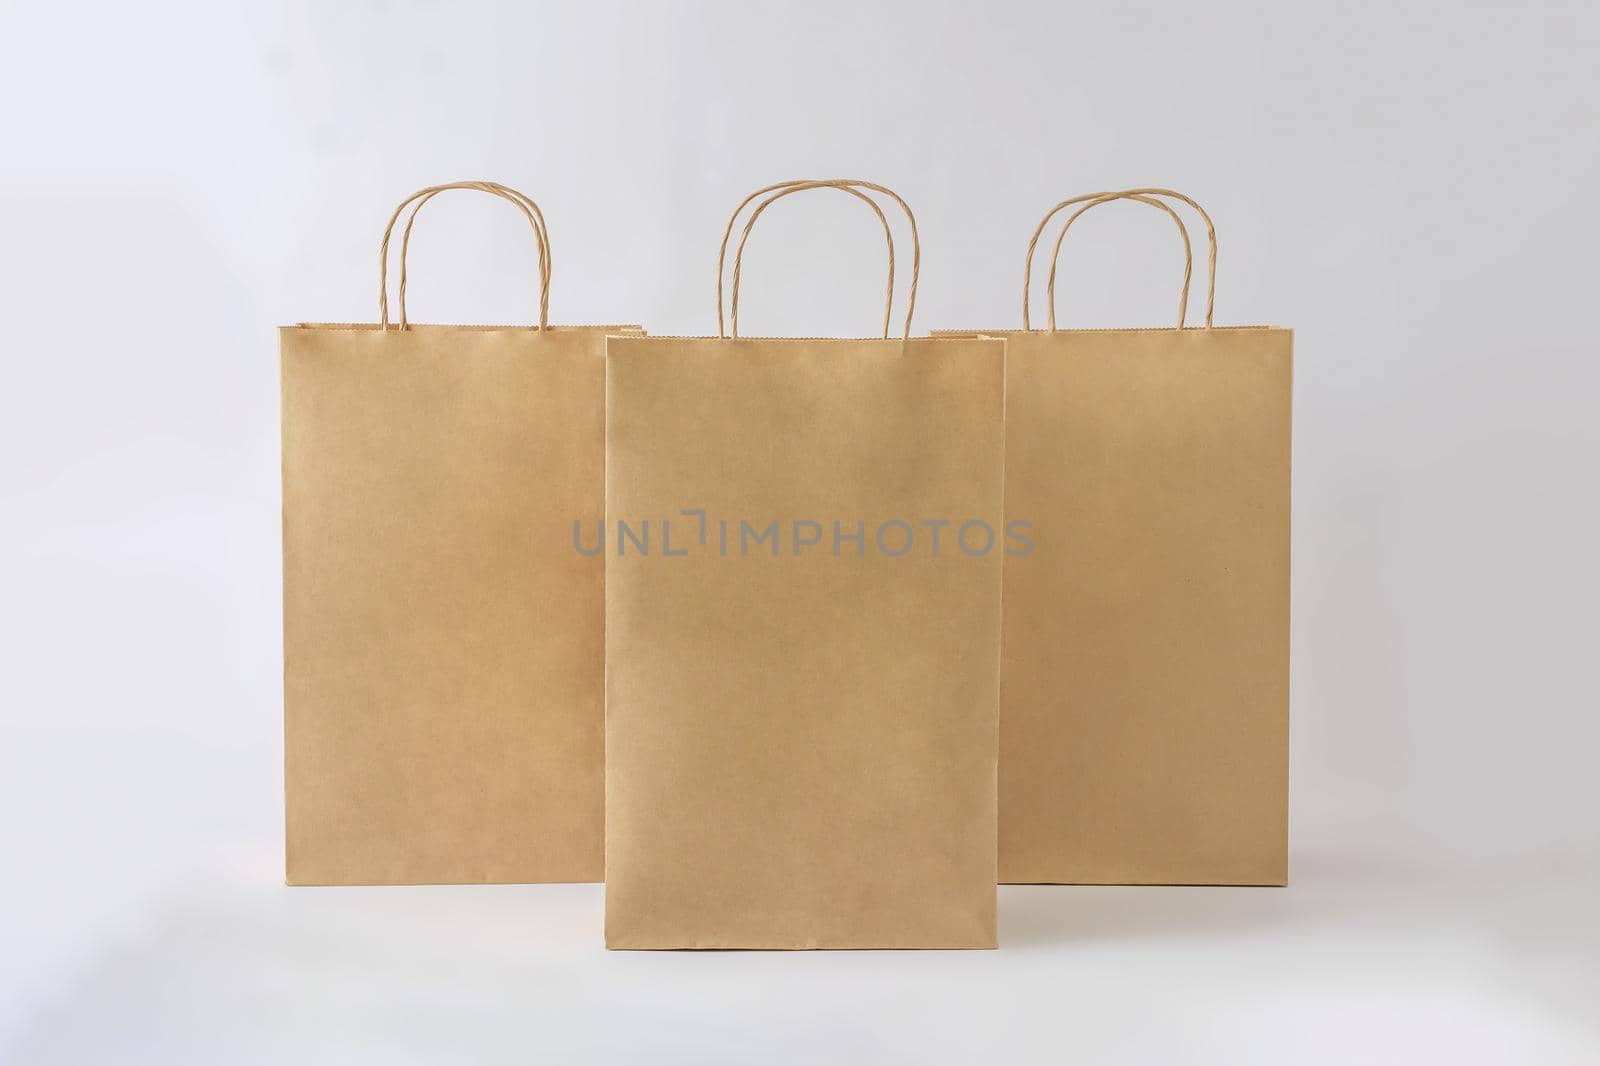 Three cardboard bags in a row on a white background as a business or delivery mockup. Concept of buy sell and recycling.